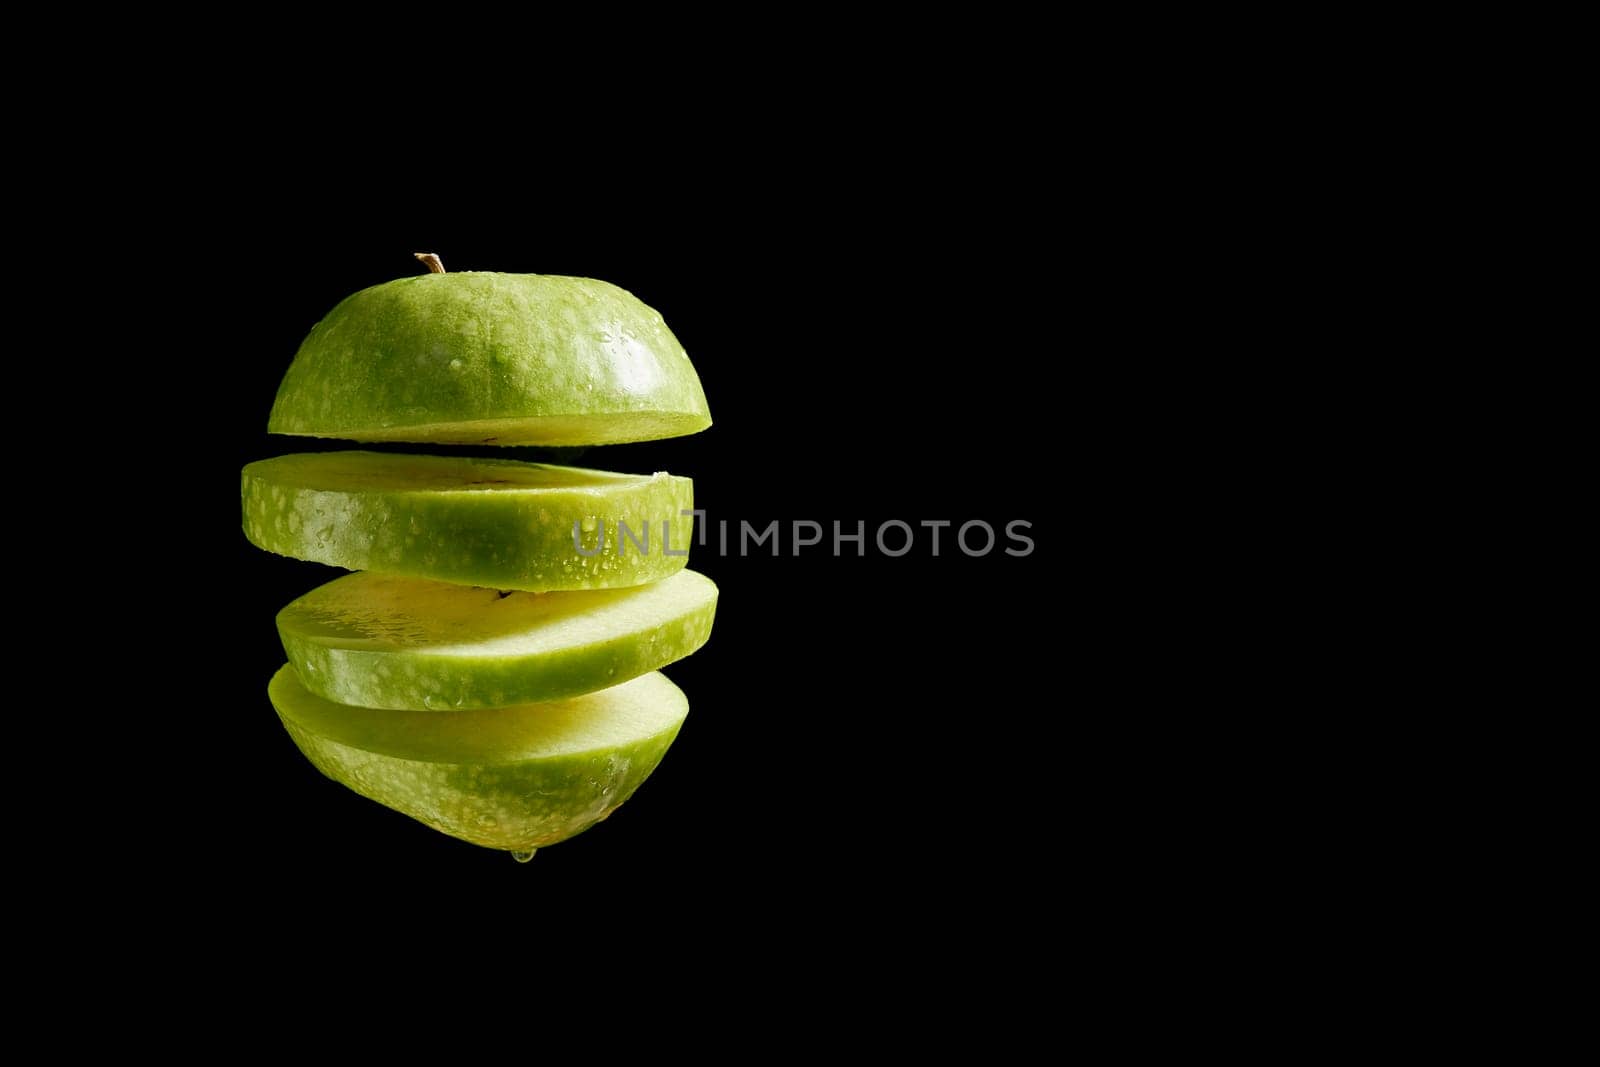 Sliced apple with water droplets over black background by superstellar